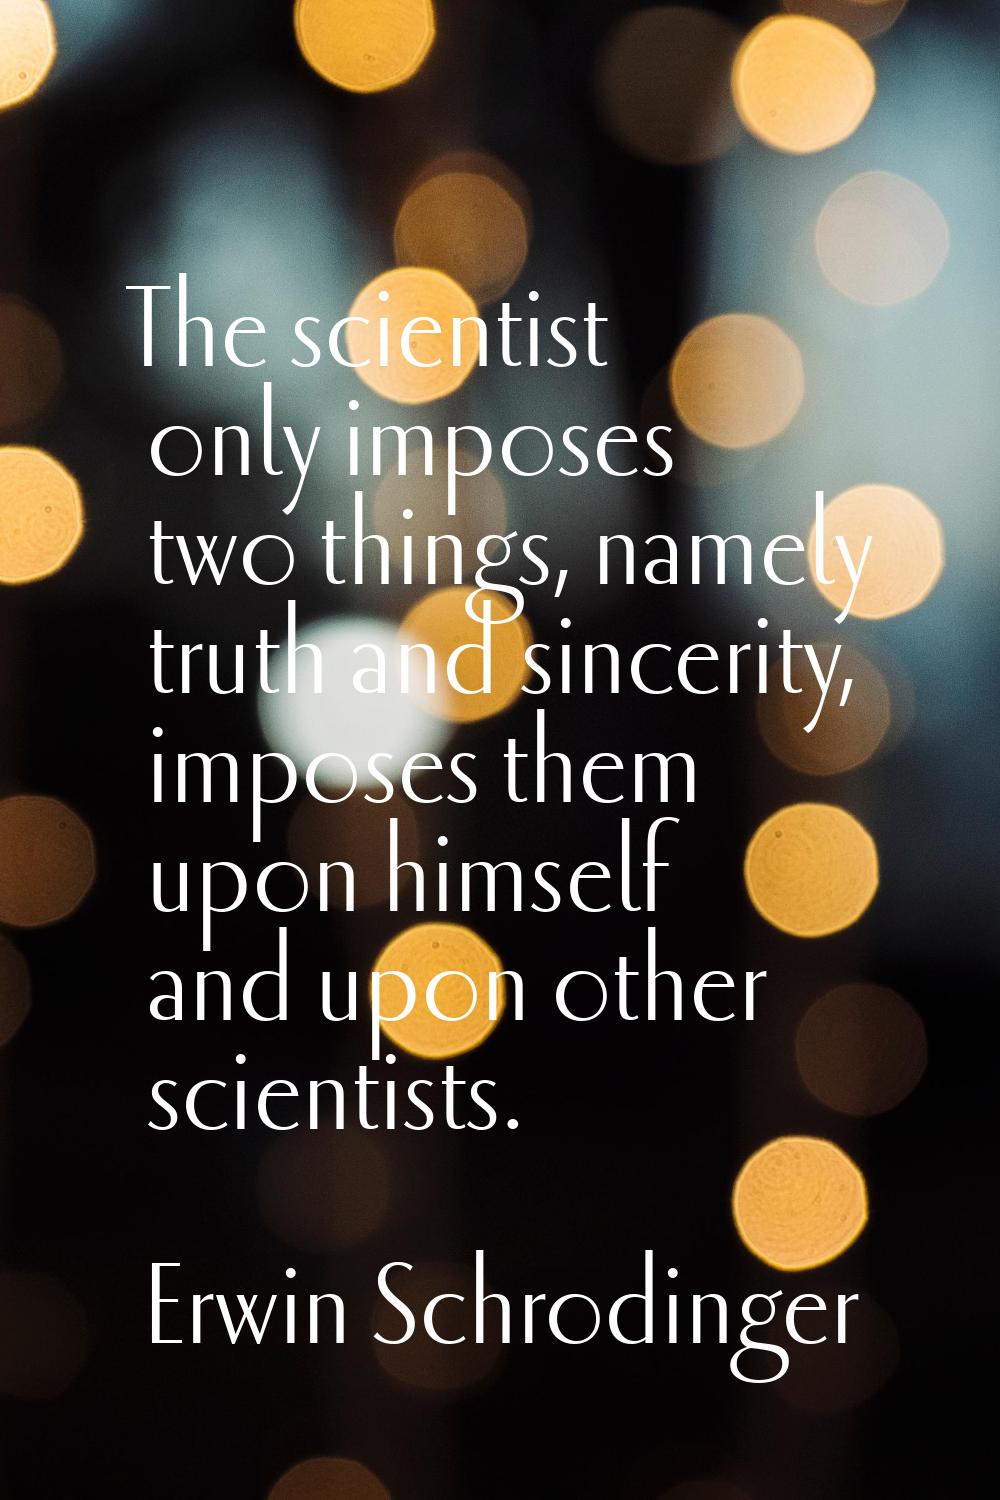 The scientist only imposes two things, namely truth and sincerity, imposes them upon himself and up